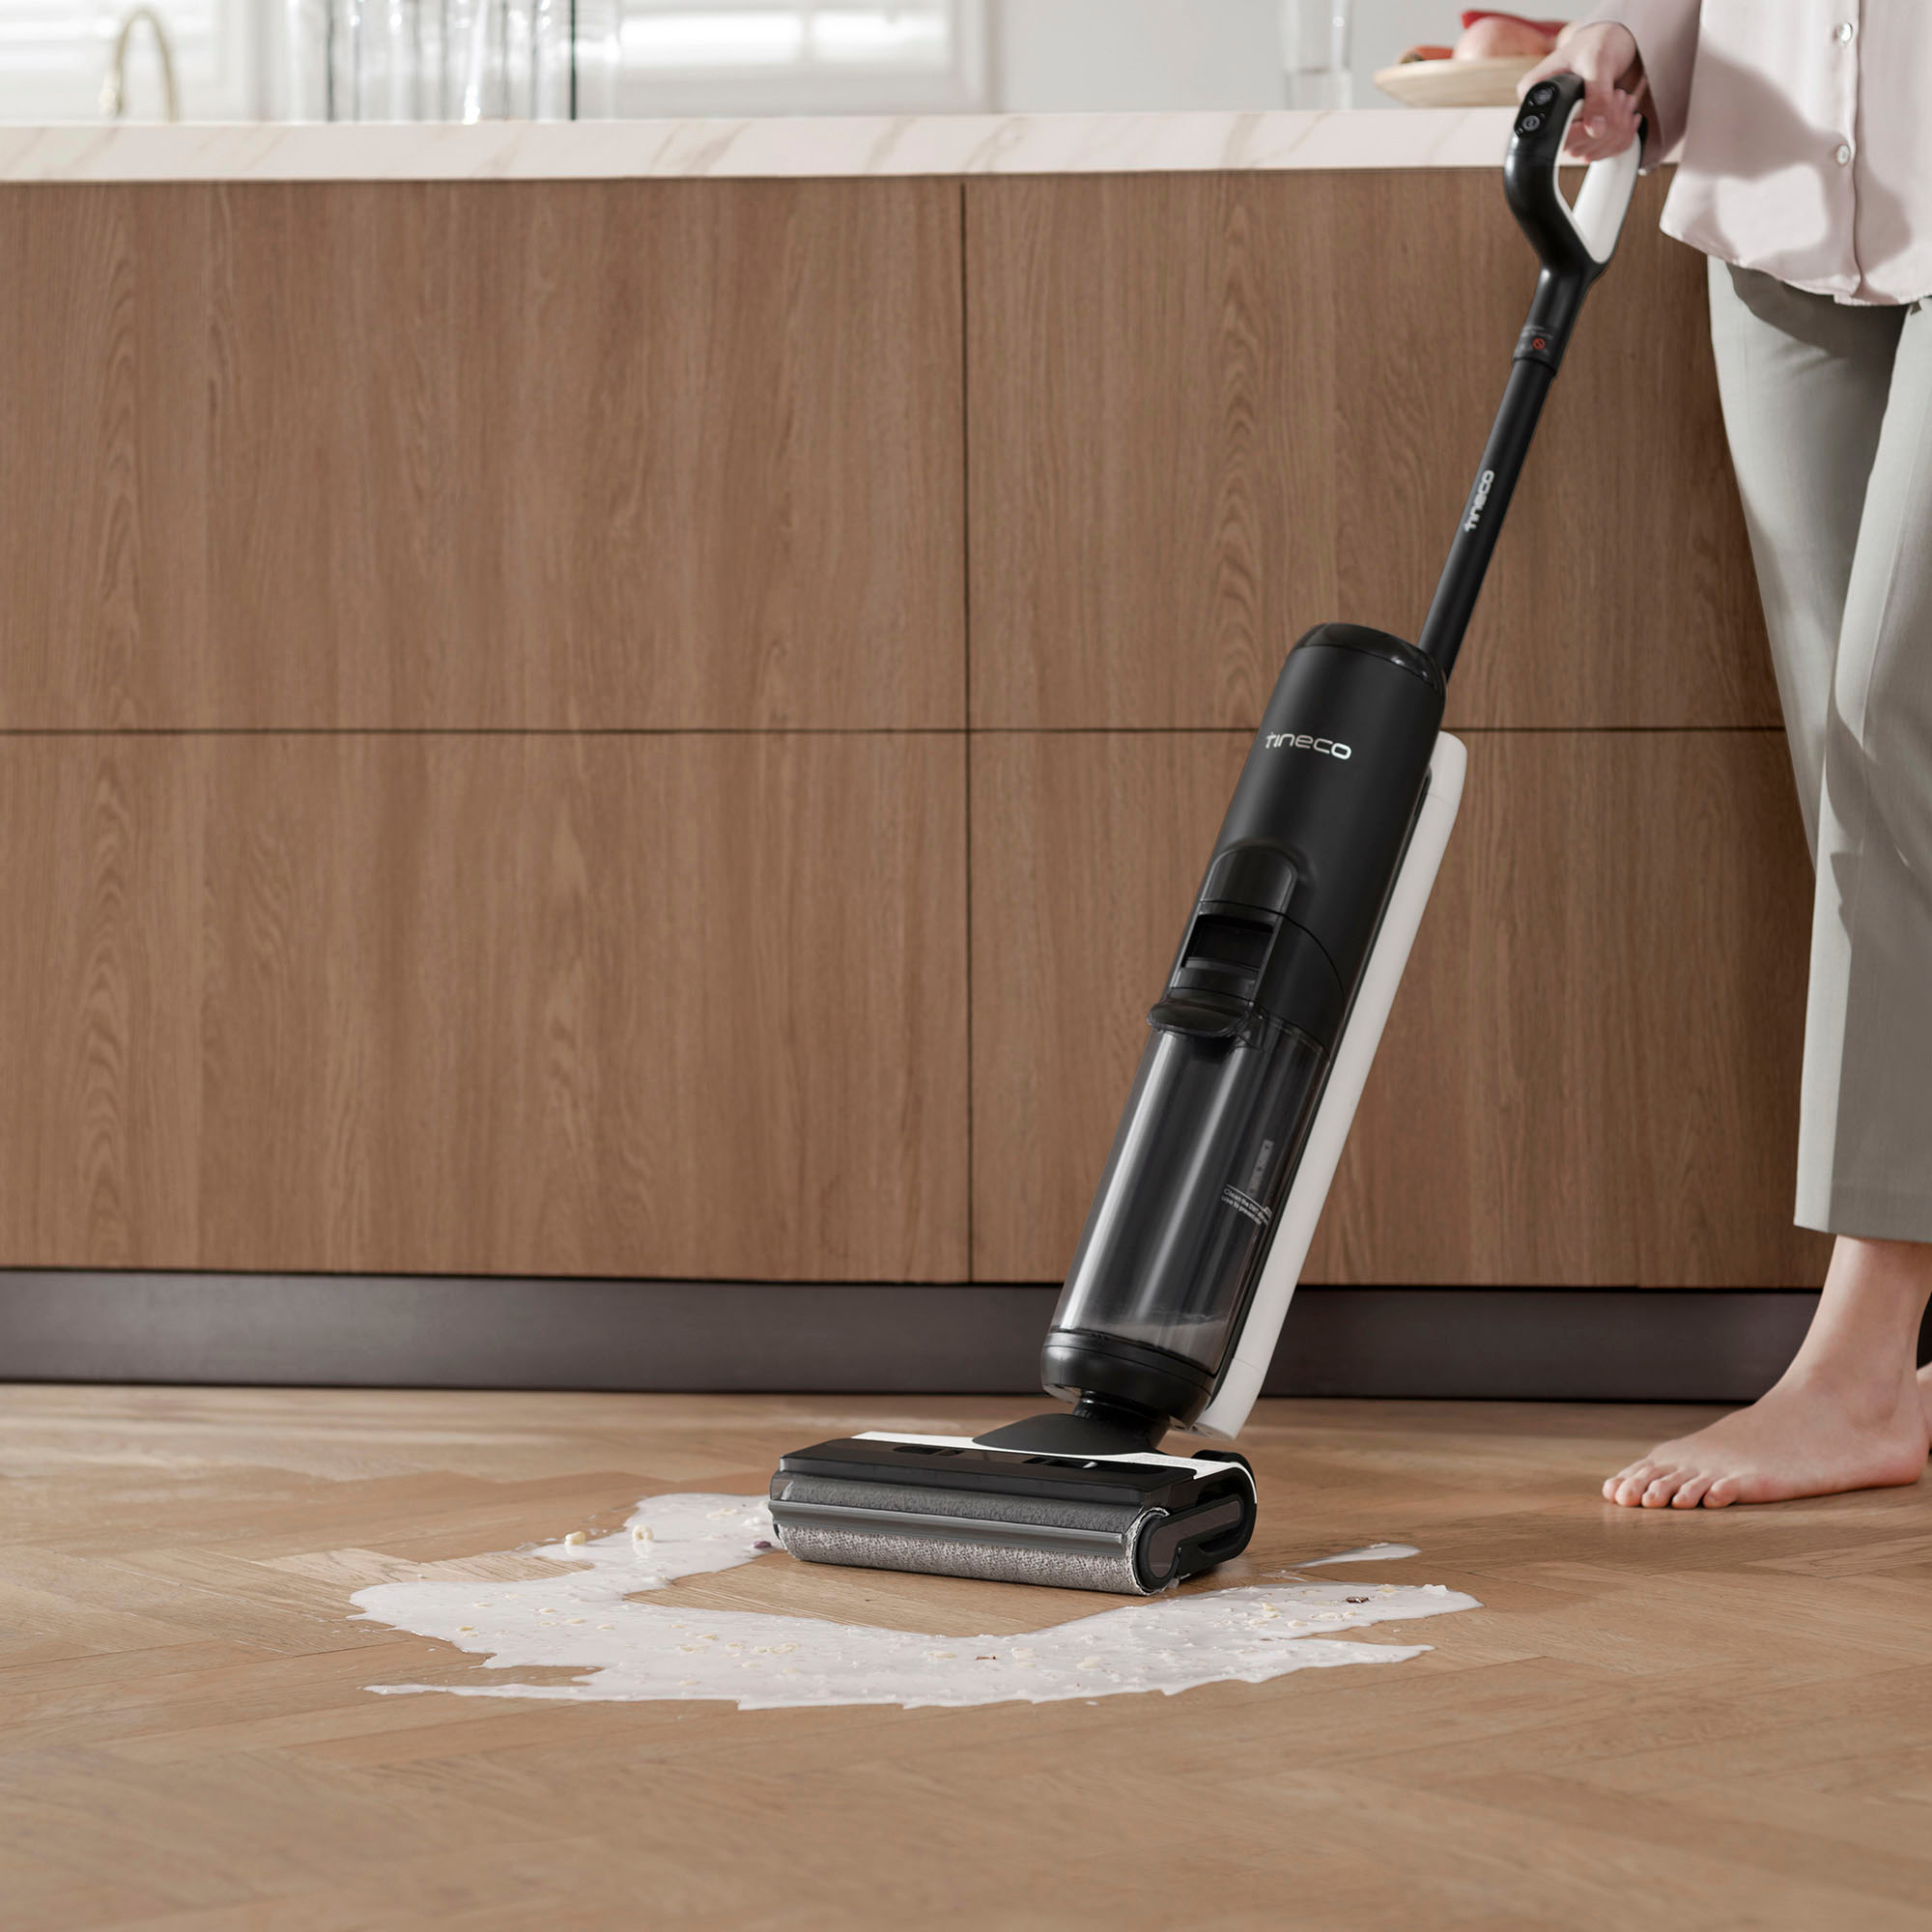 Angle View: Tineco - Floor One S6 Extreme Pro – 3 in 1 Mop, Vacuum & Self Cleaning Smart Floor Washer with iLoop Smart Sensor - Black